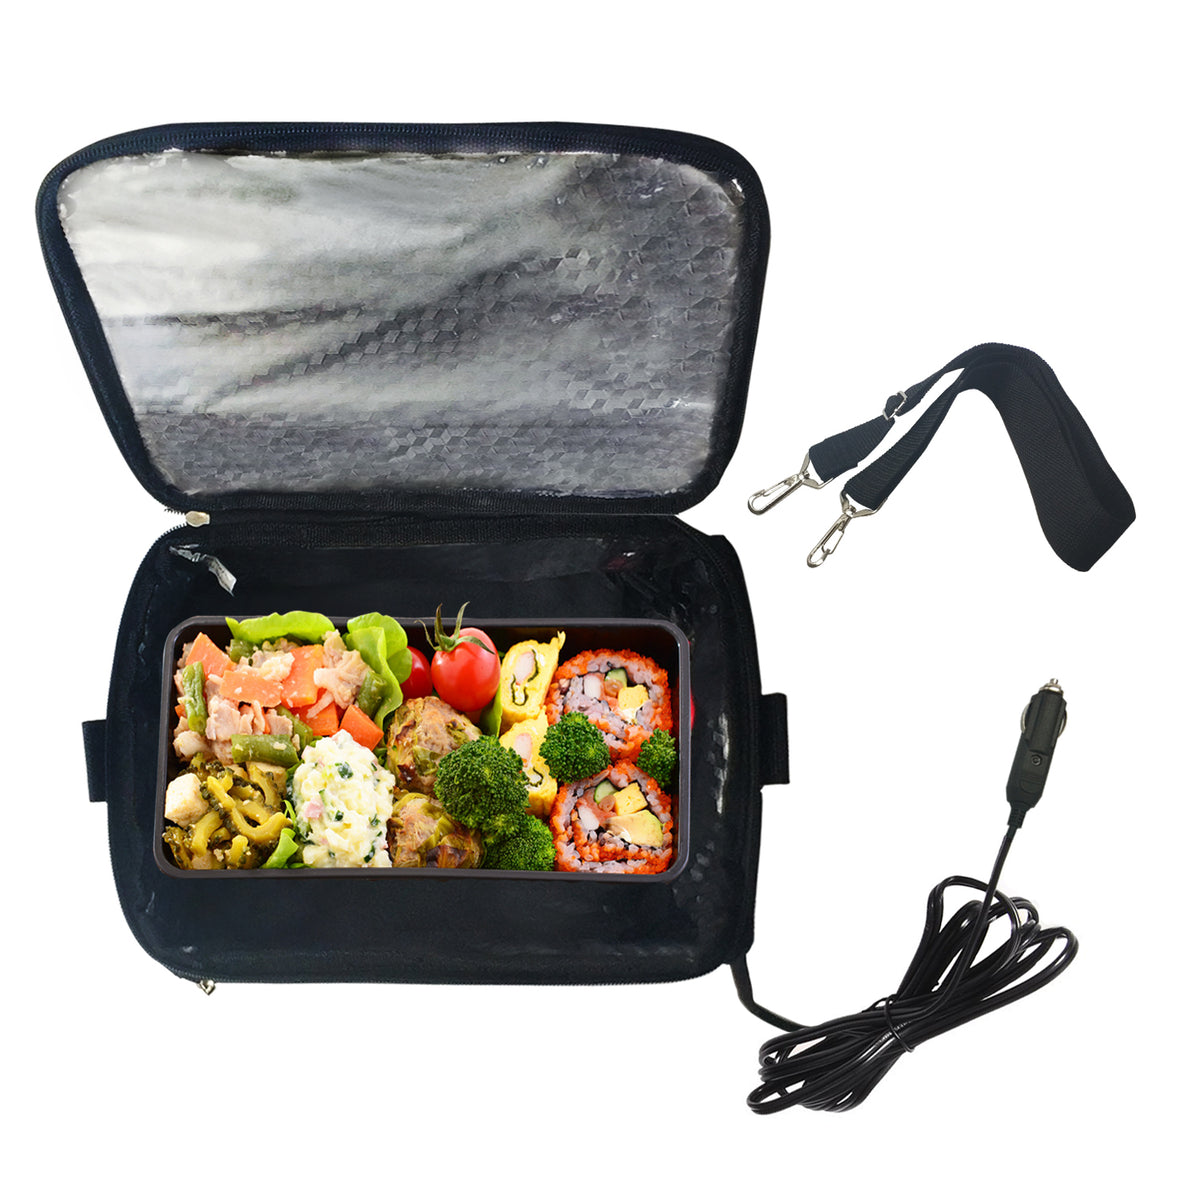 NEW Portable Food Warmers Heater Lunch Box Mini Oven Microwave for Travel  Office